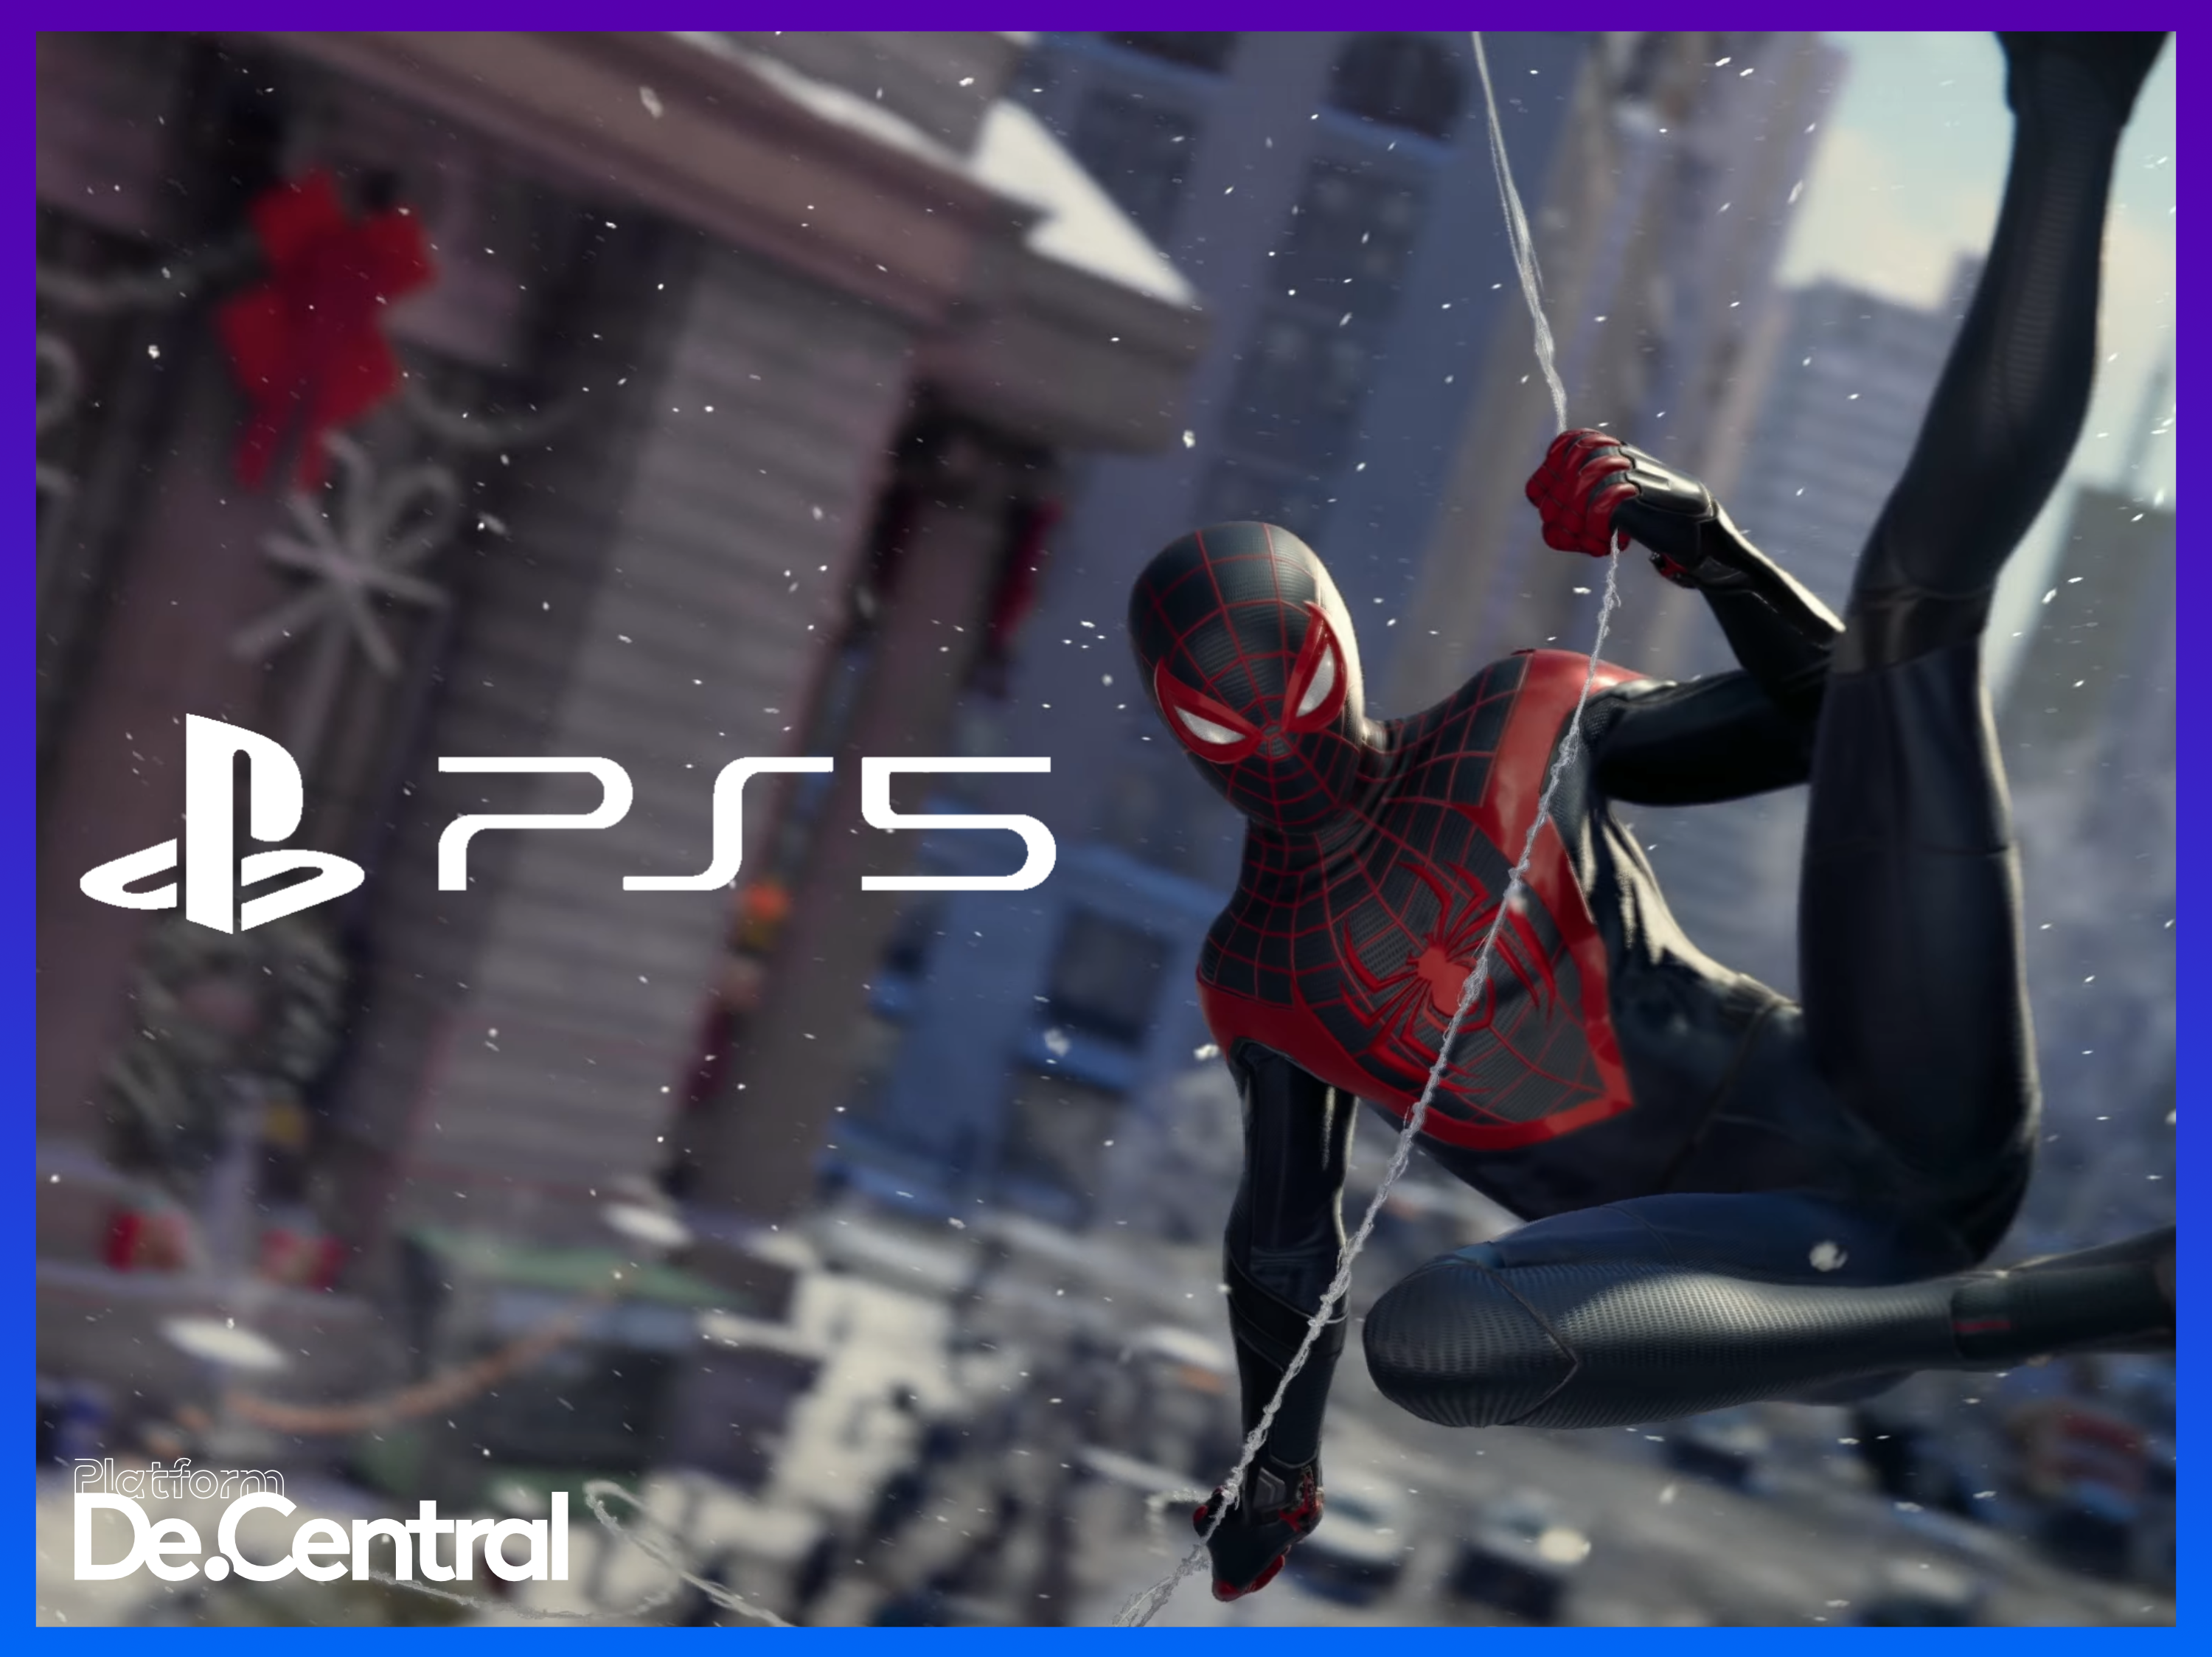 Watch all 26 PS5 game trailers here